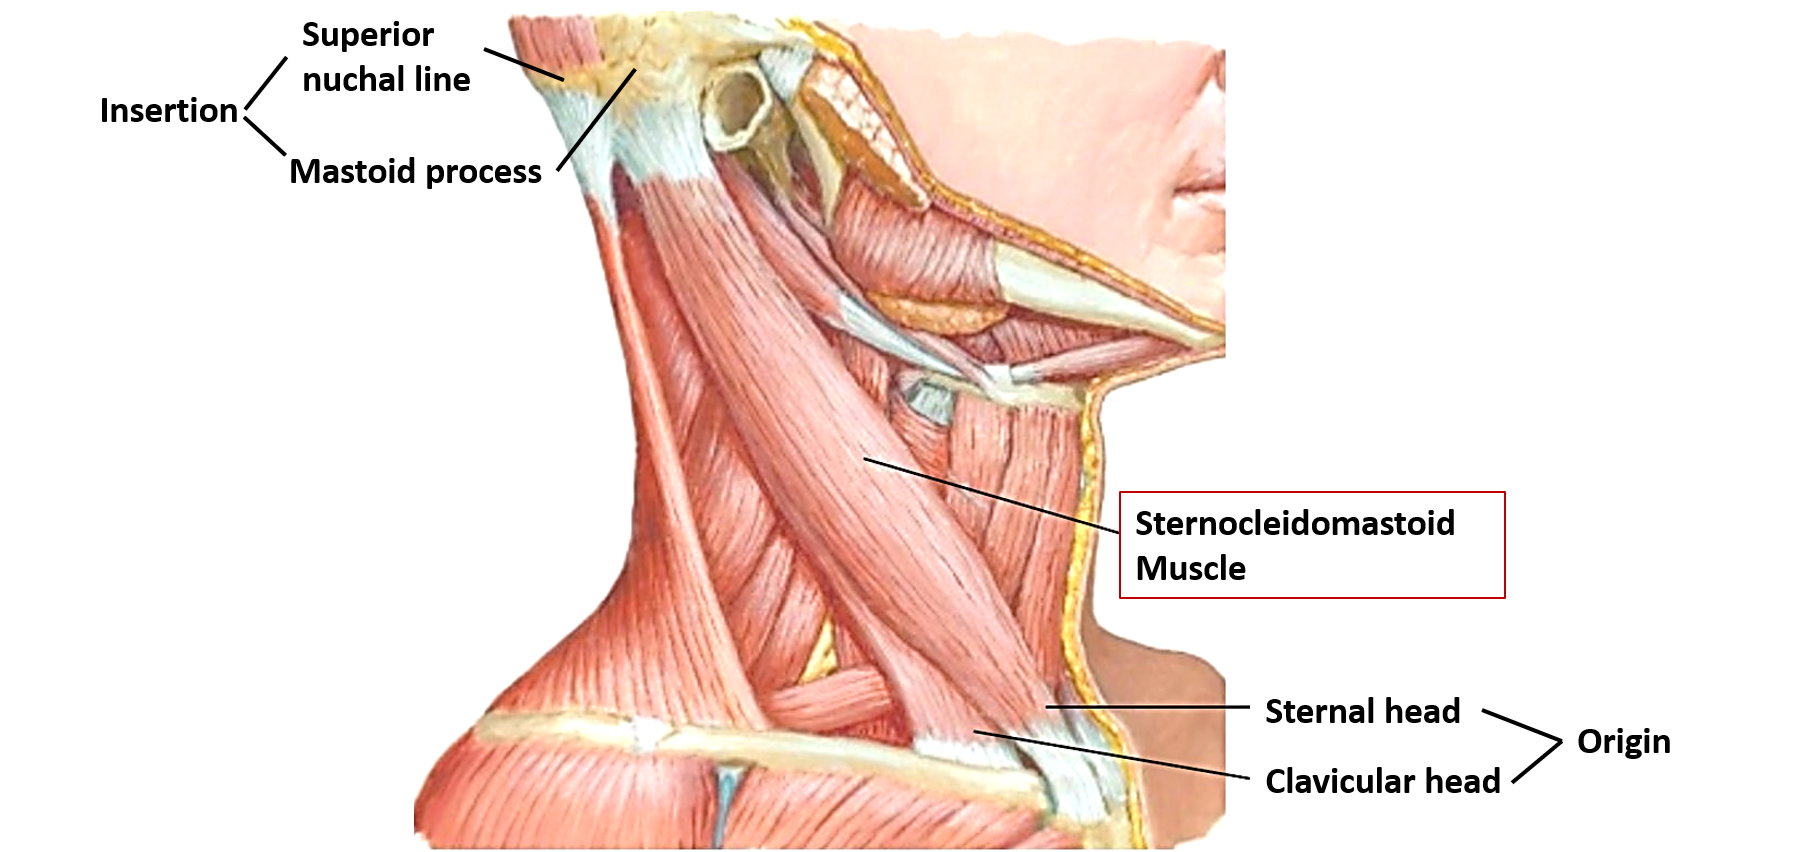 Origin and insertion of sternocleidomastoid muscle